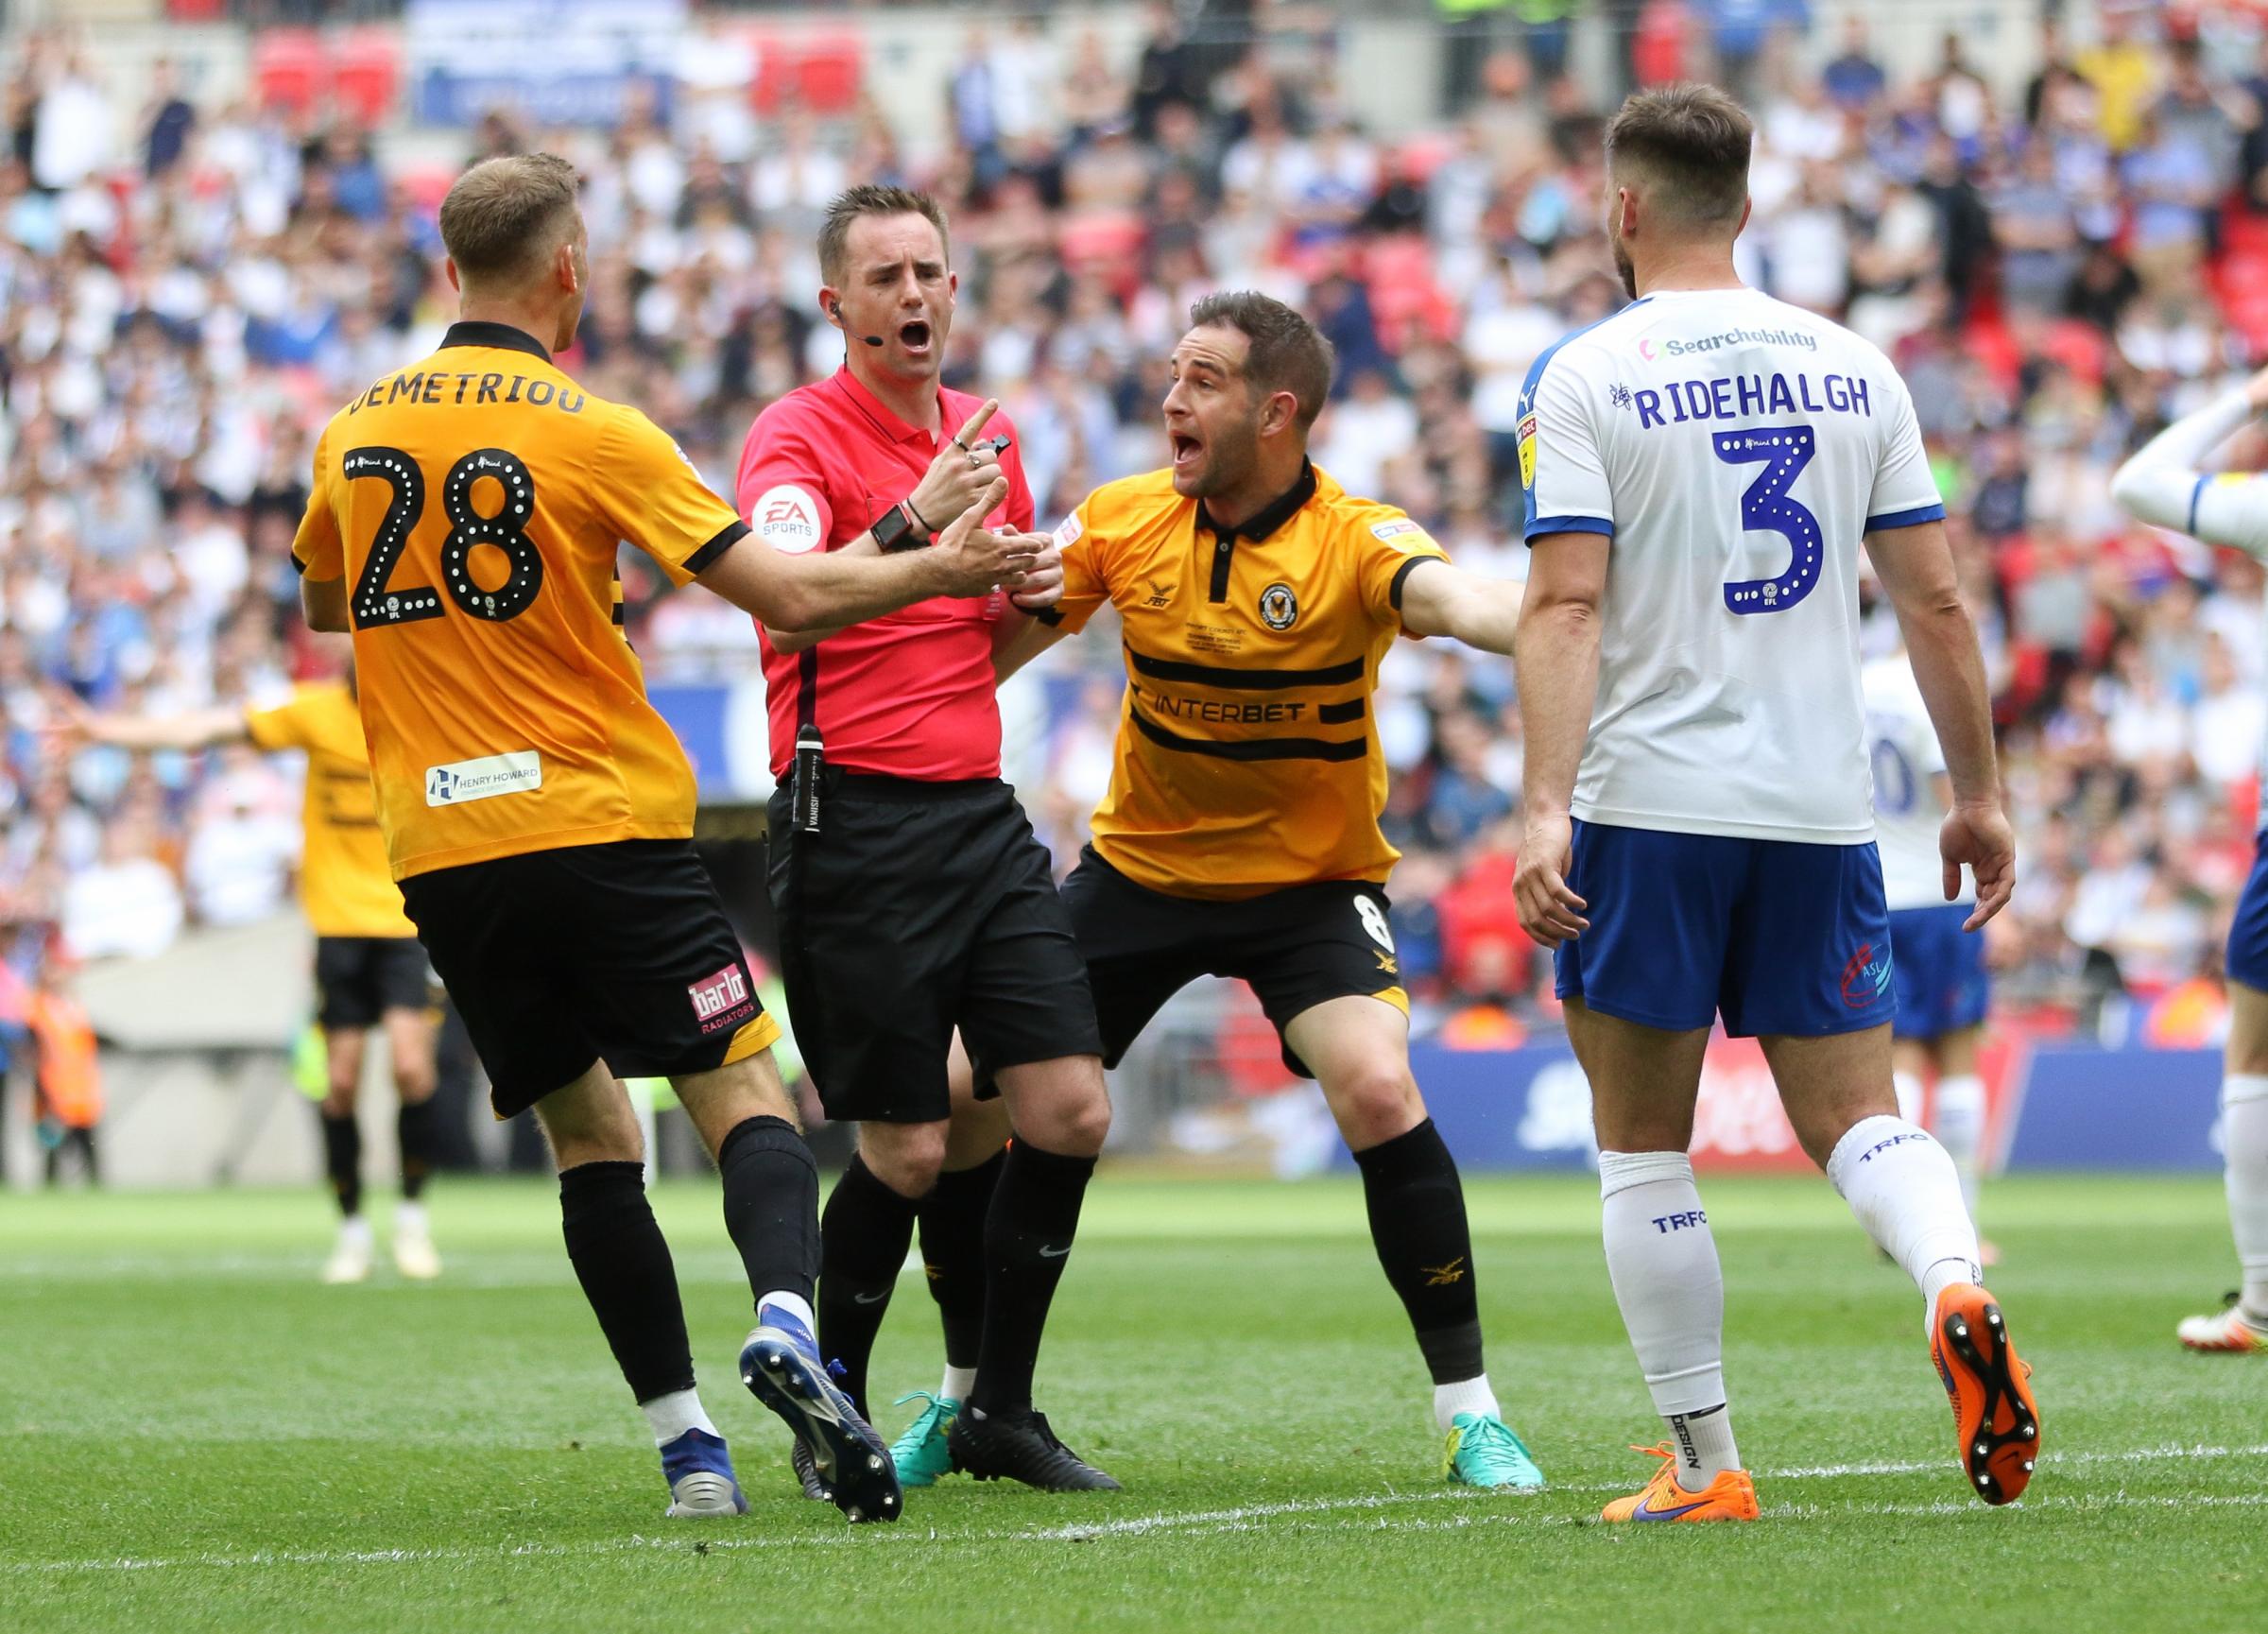 25.05.19 - Newport County v Tranmere Rovers, Sky Bet League 2 Play-Off Final - Mickey Demetriou of Newport County and Matty Dolan of Newport County appeal to referee Ross Joyce after Jamille Matt of Newport County is brought down by Emmanuel Monthe of